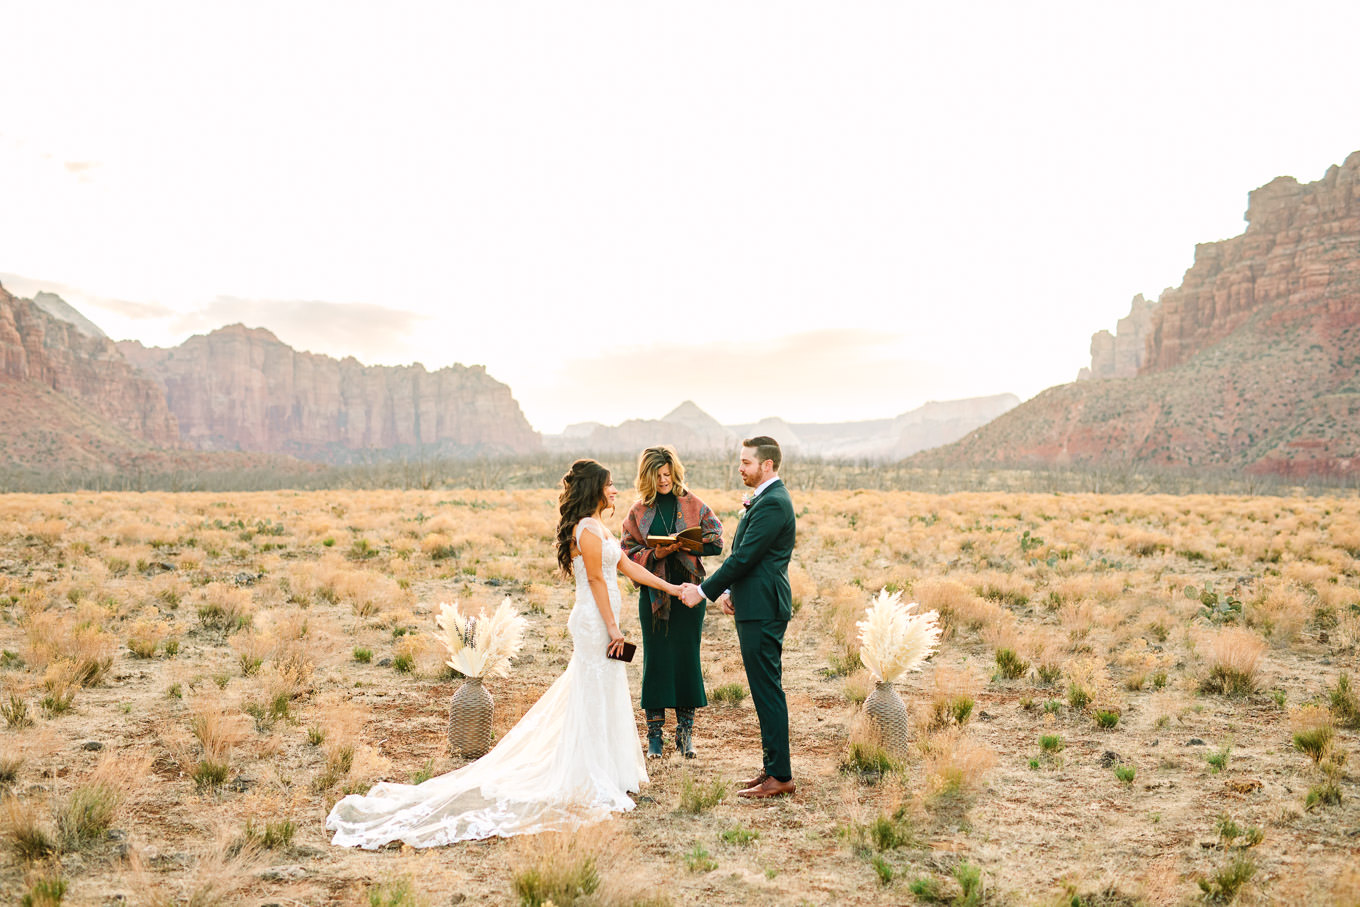 Ceremony among mountains | Zion Under Canvas camping elopement at sunrise | Colorful elopement photography | #utahelopement #zionelopement #zionwedding #undercanvaszion #sunriseelopement #adventureelopement  Source: Mary Costa Photography | Los Angeles